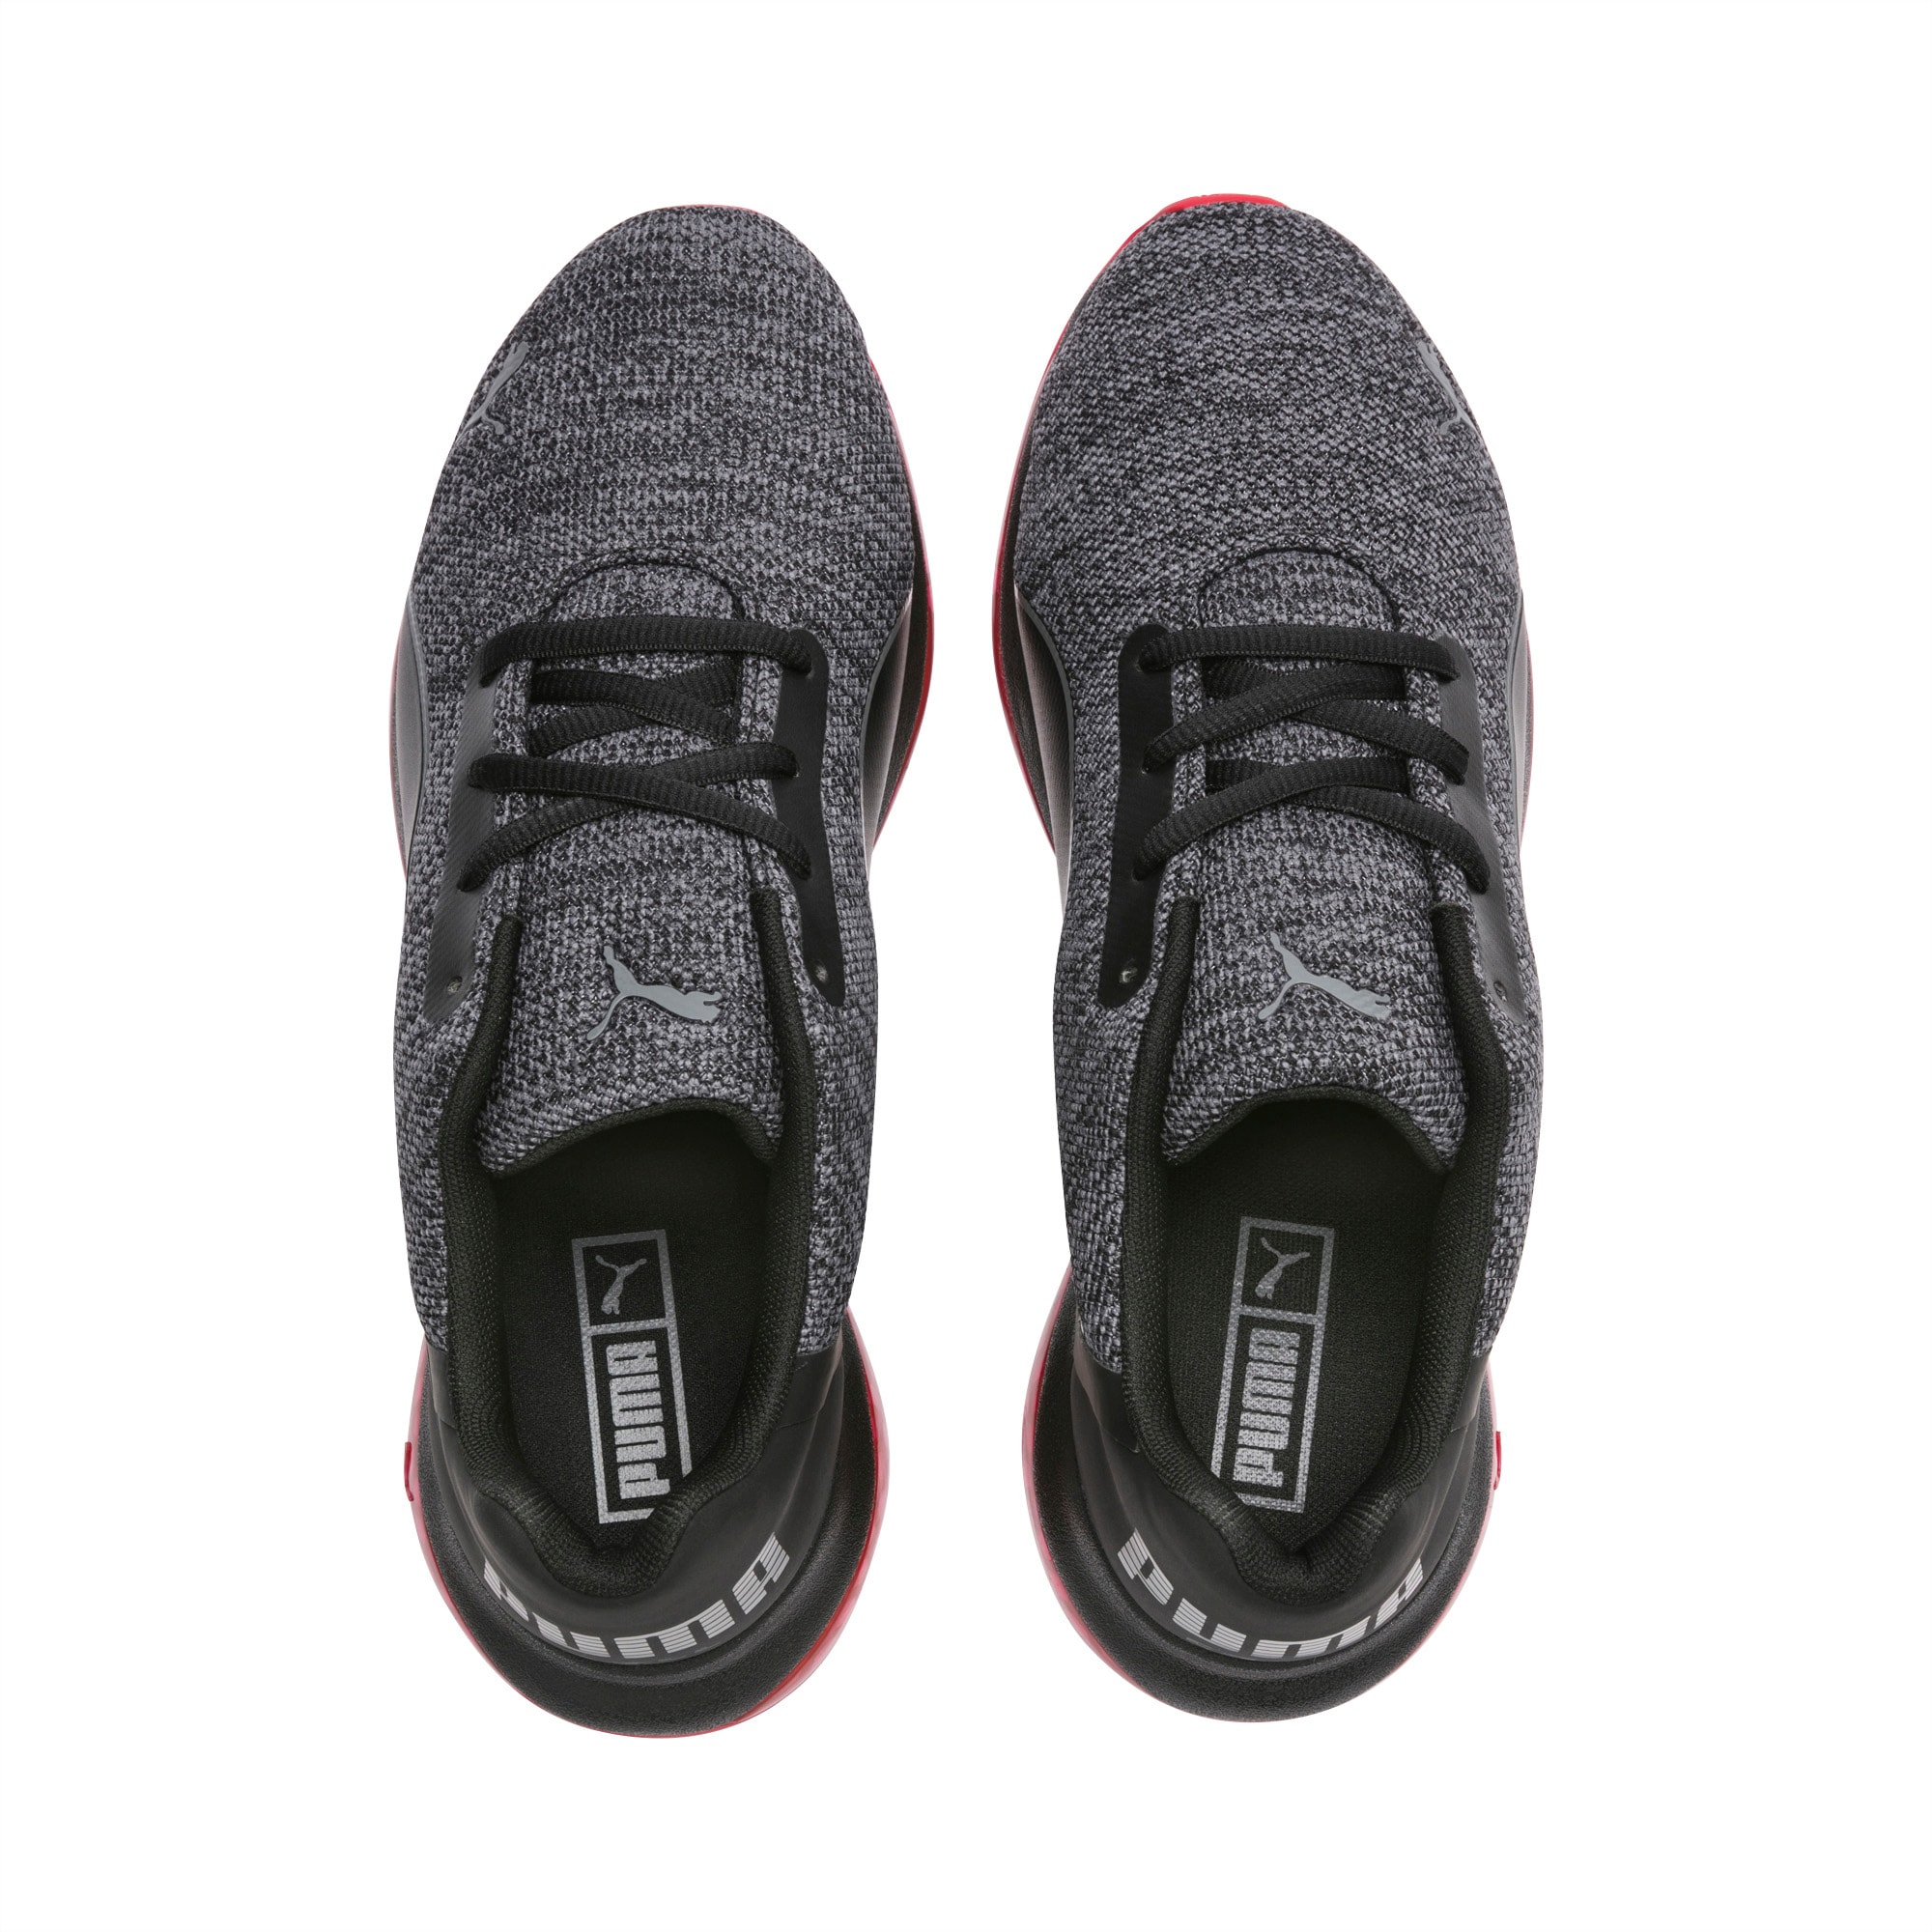 CELL Ultimate Knit Men's Training Shoes 